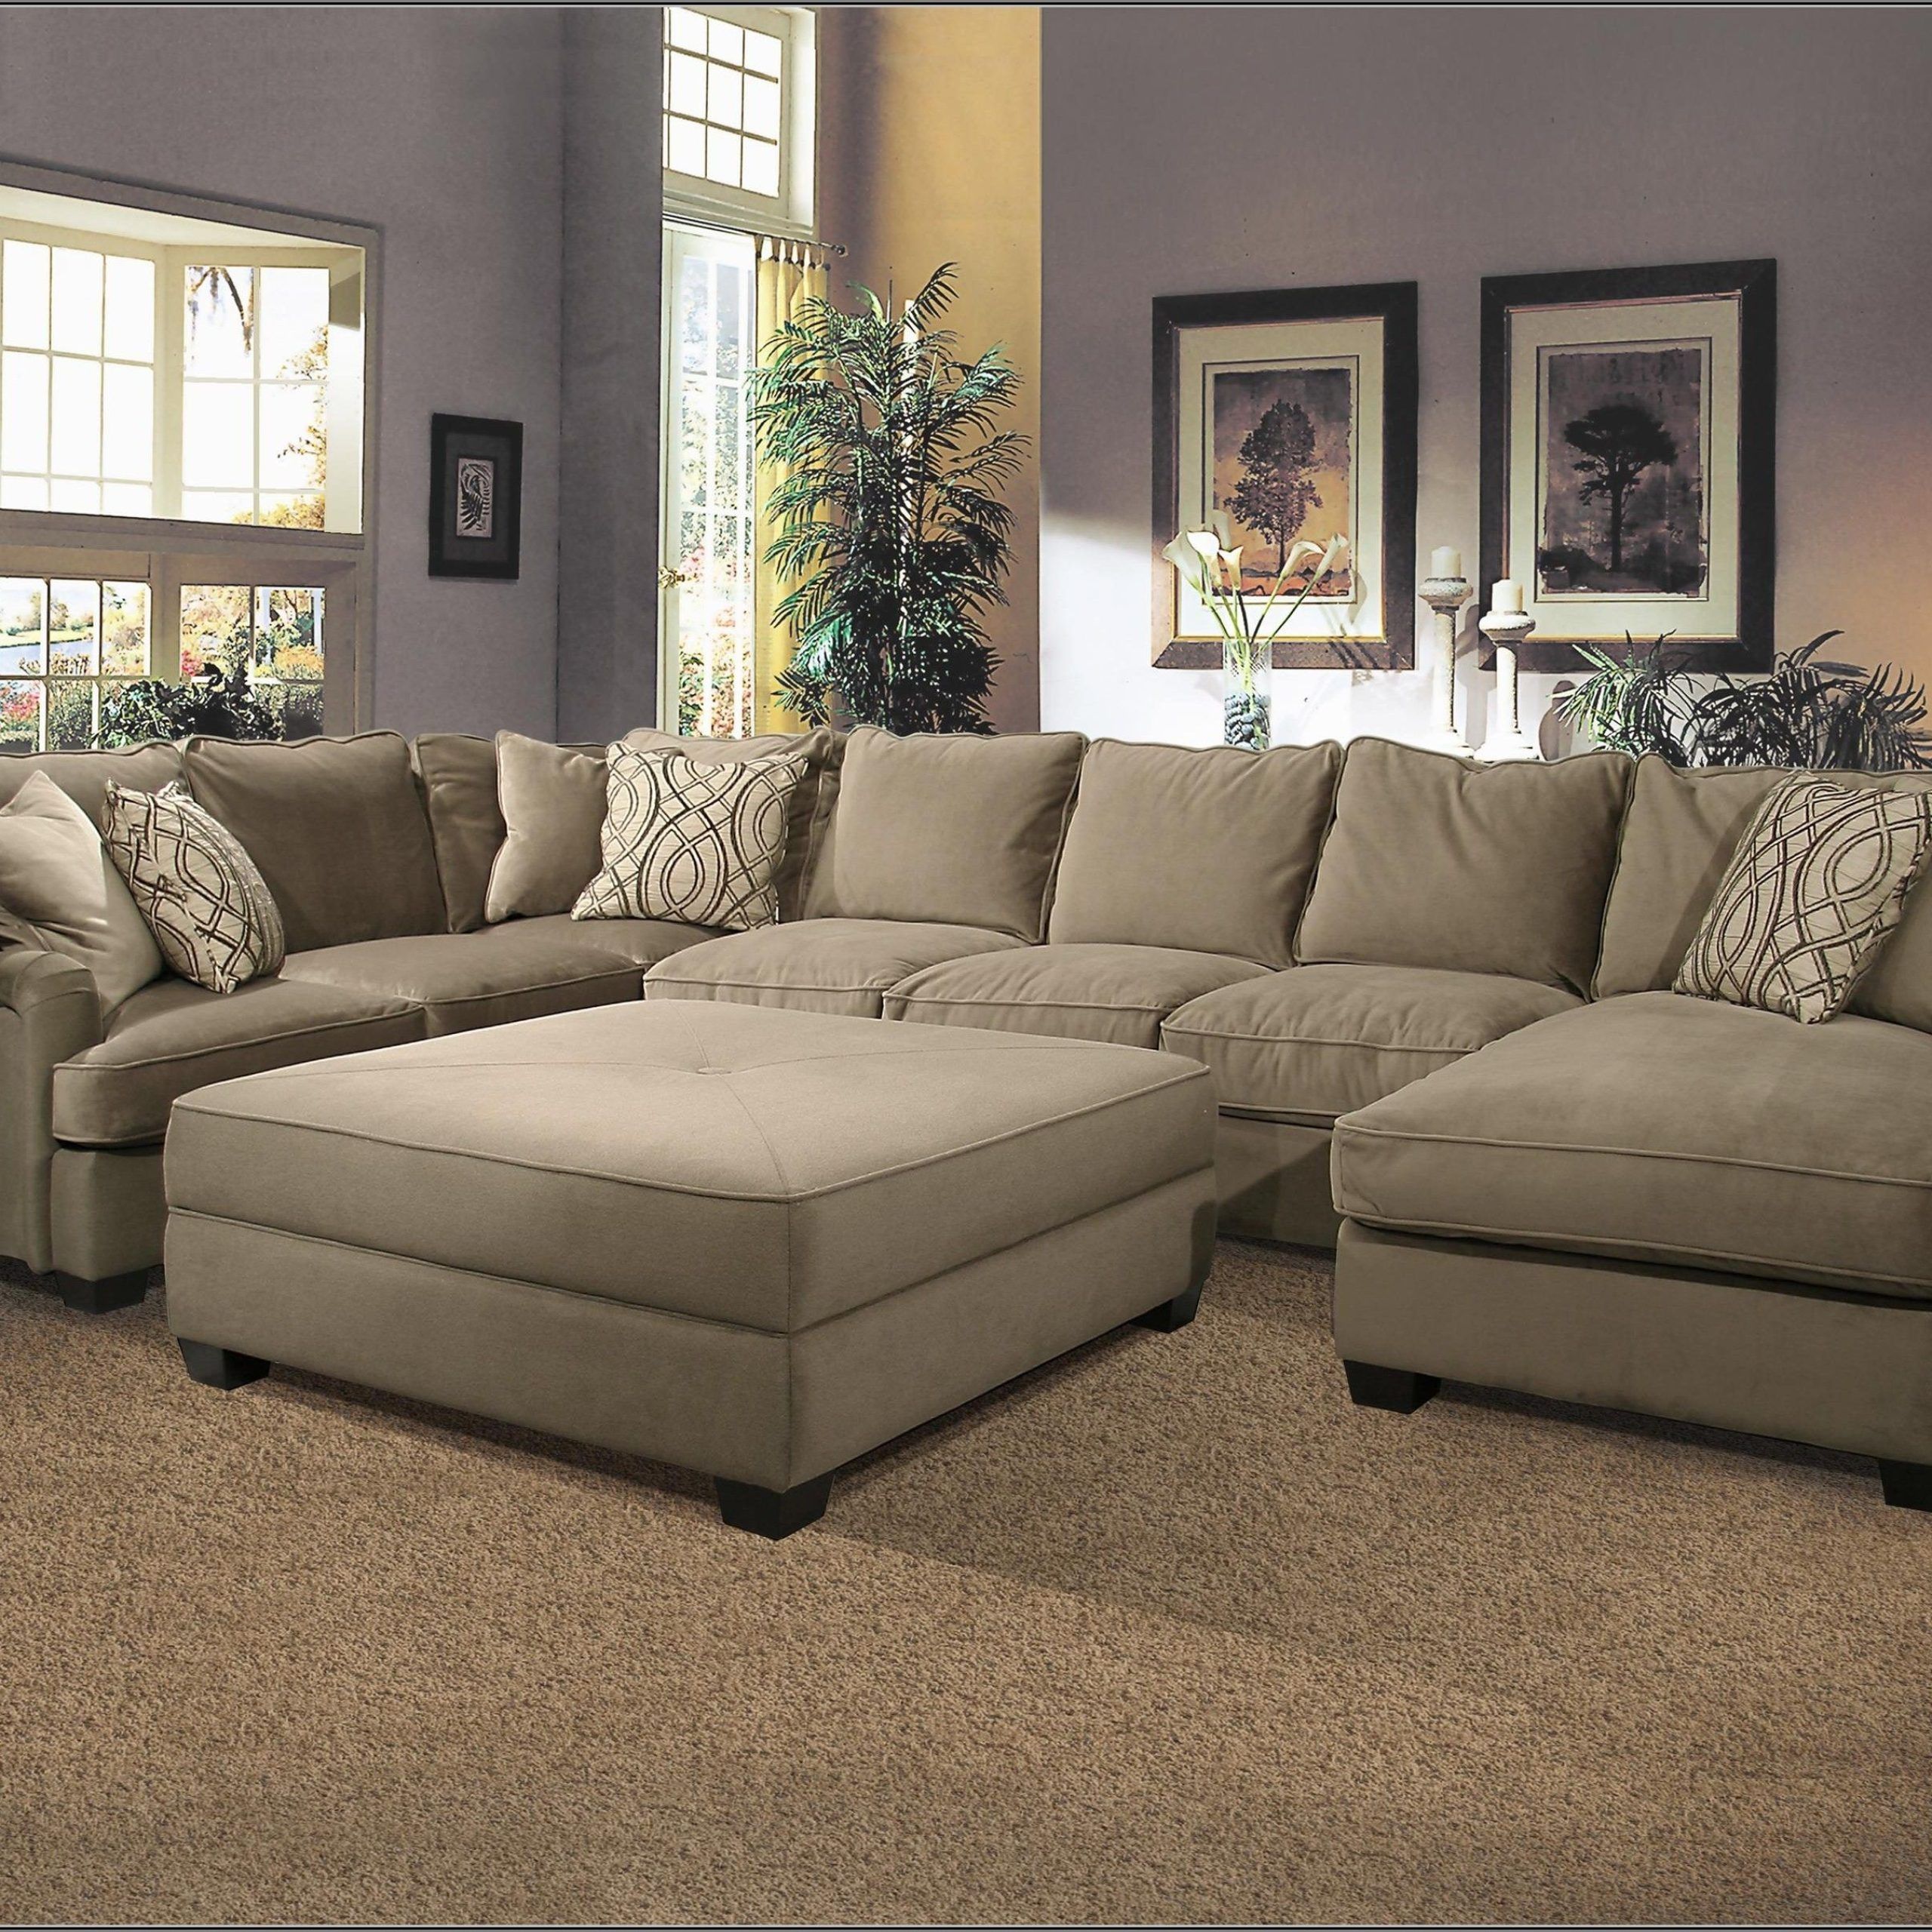 10 Ideas Of Big U Shaped Couches | Sofa Ideas Within U Shaped Couches In Beige (View 20 of 20)